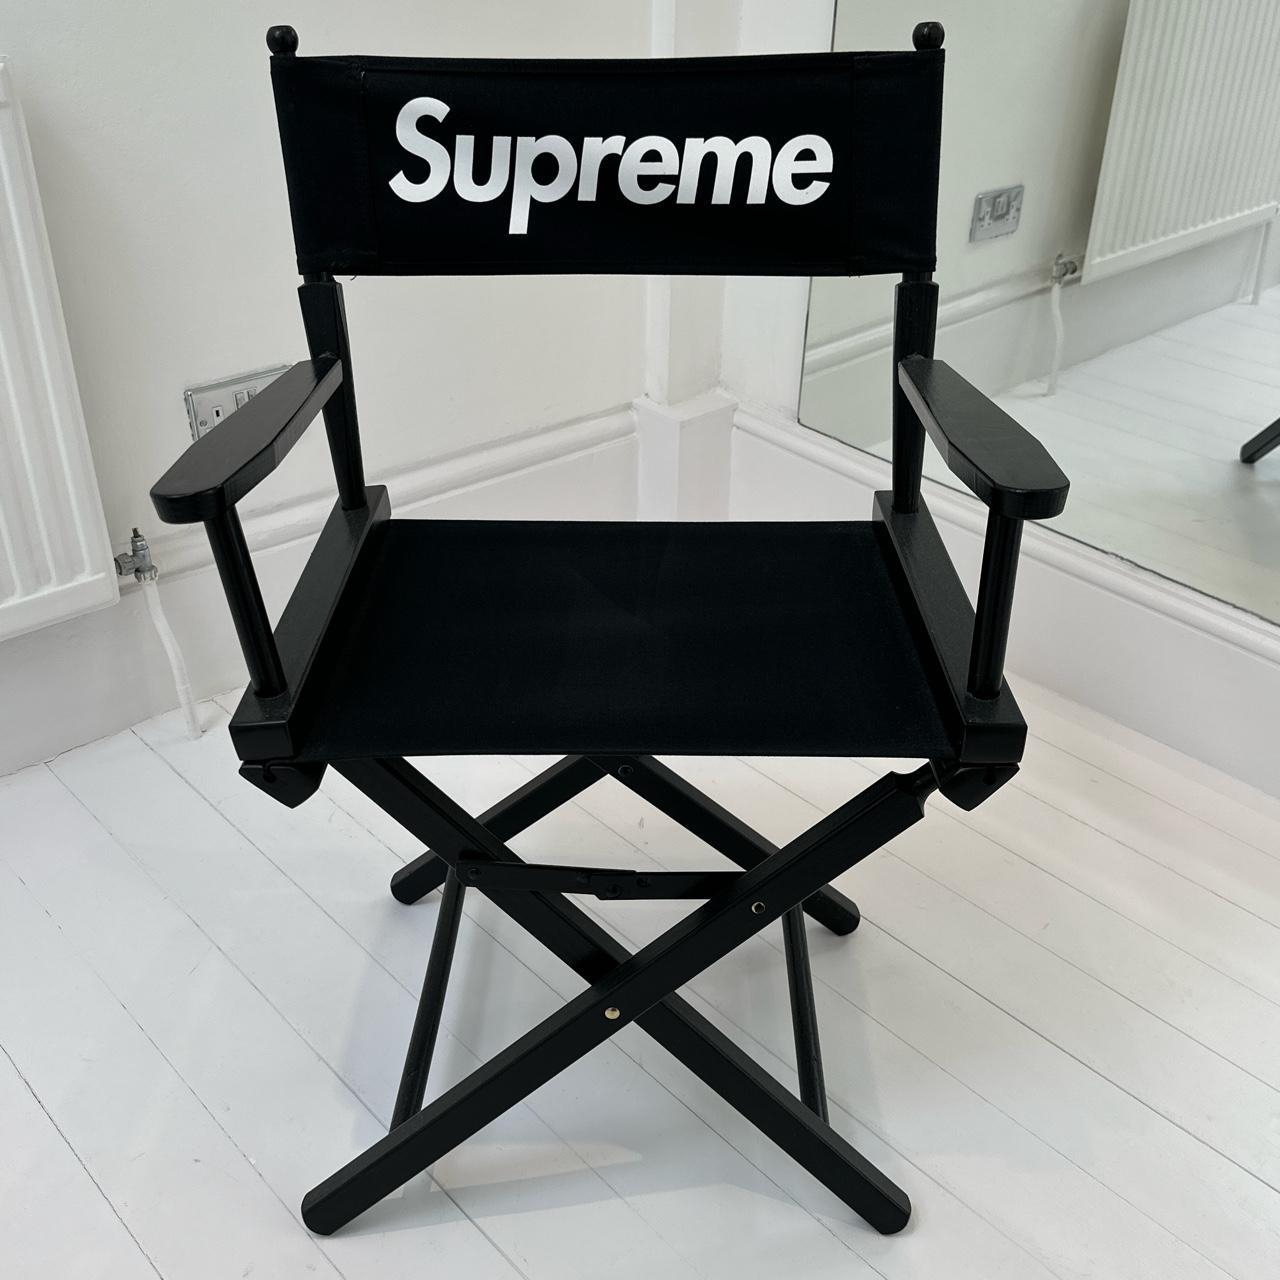 #Supreme Director's Chair, Style: Black, Never been...